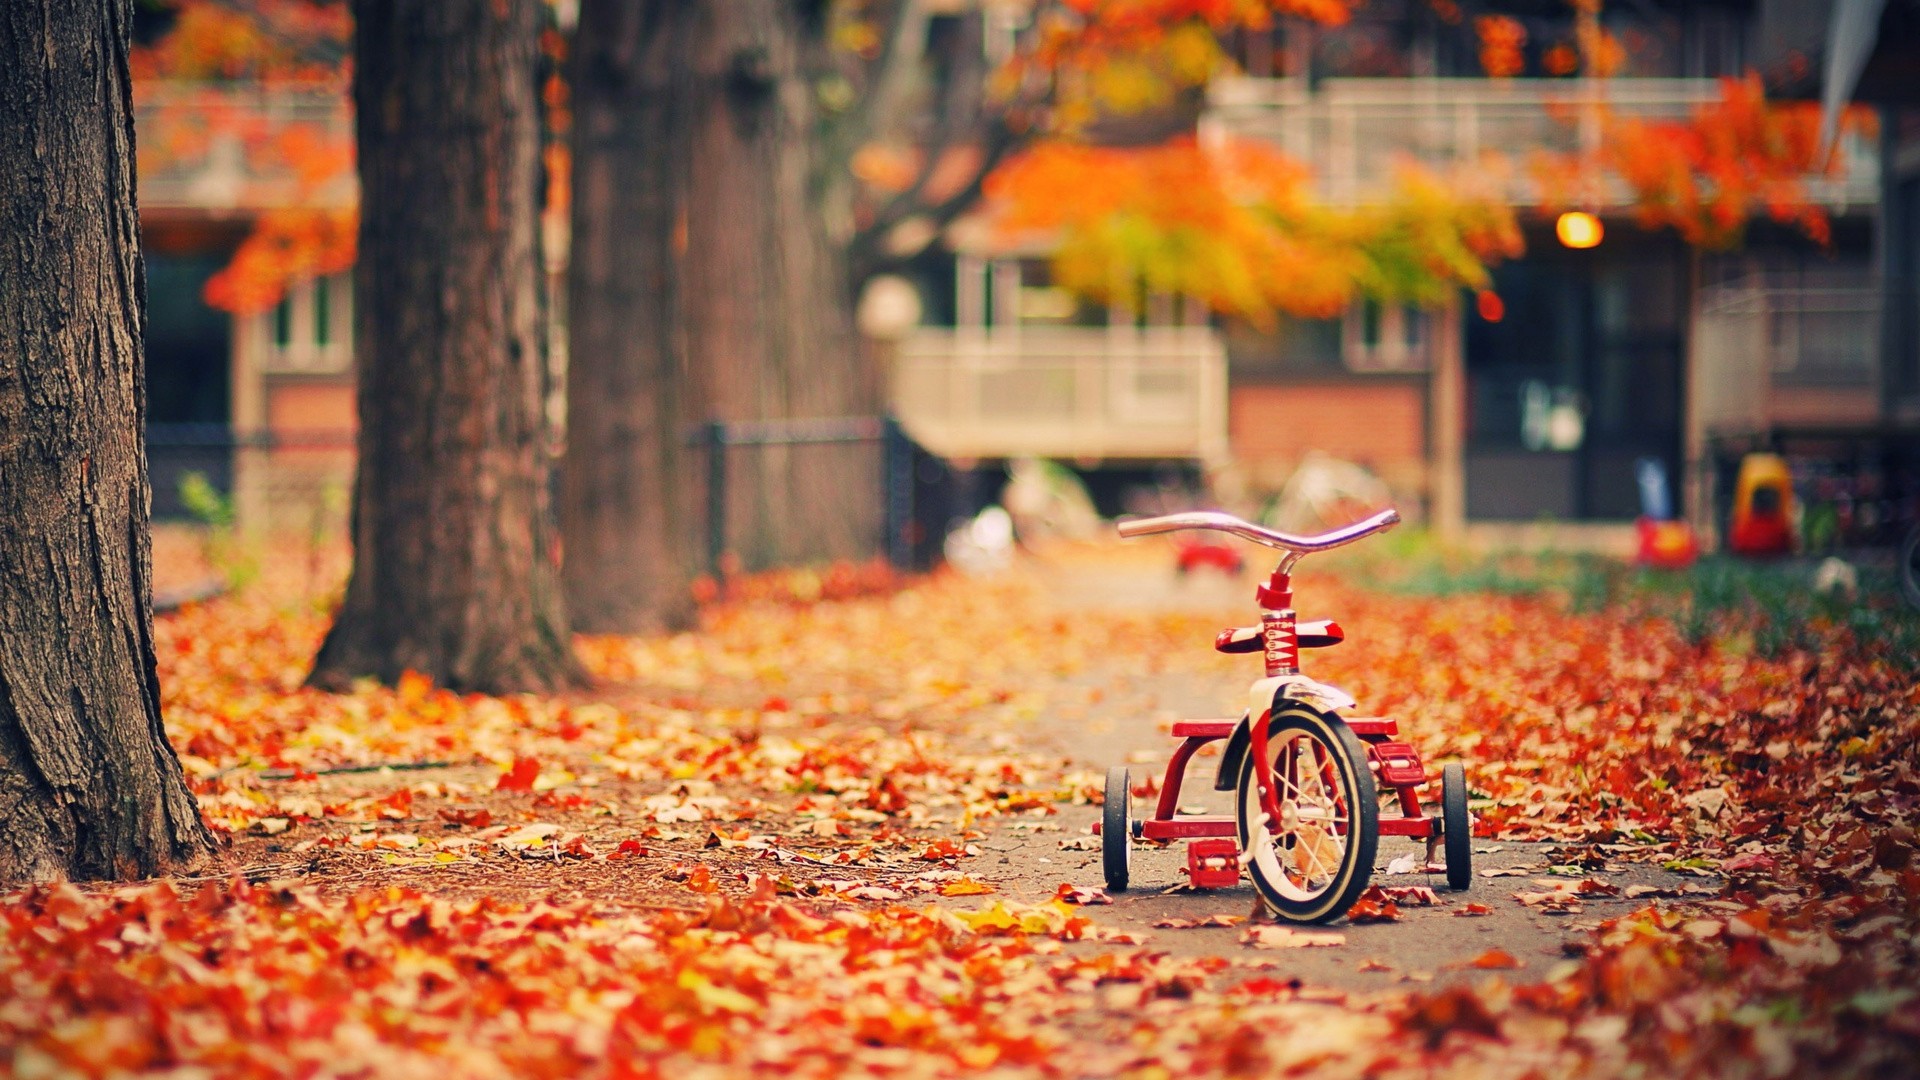 General 1920x1080 trees fall leaves vehicle outdoors fallen leaves